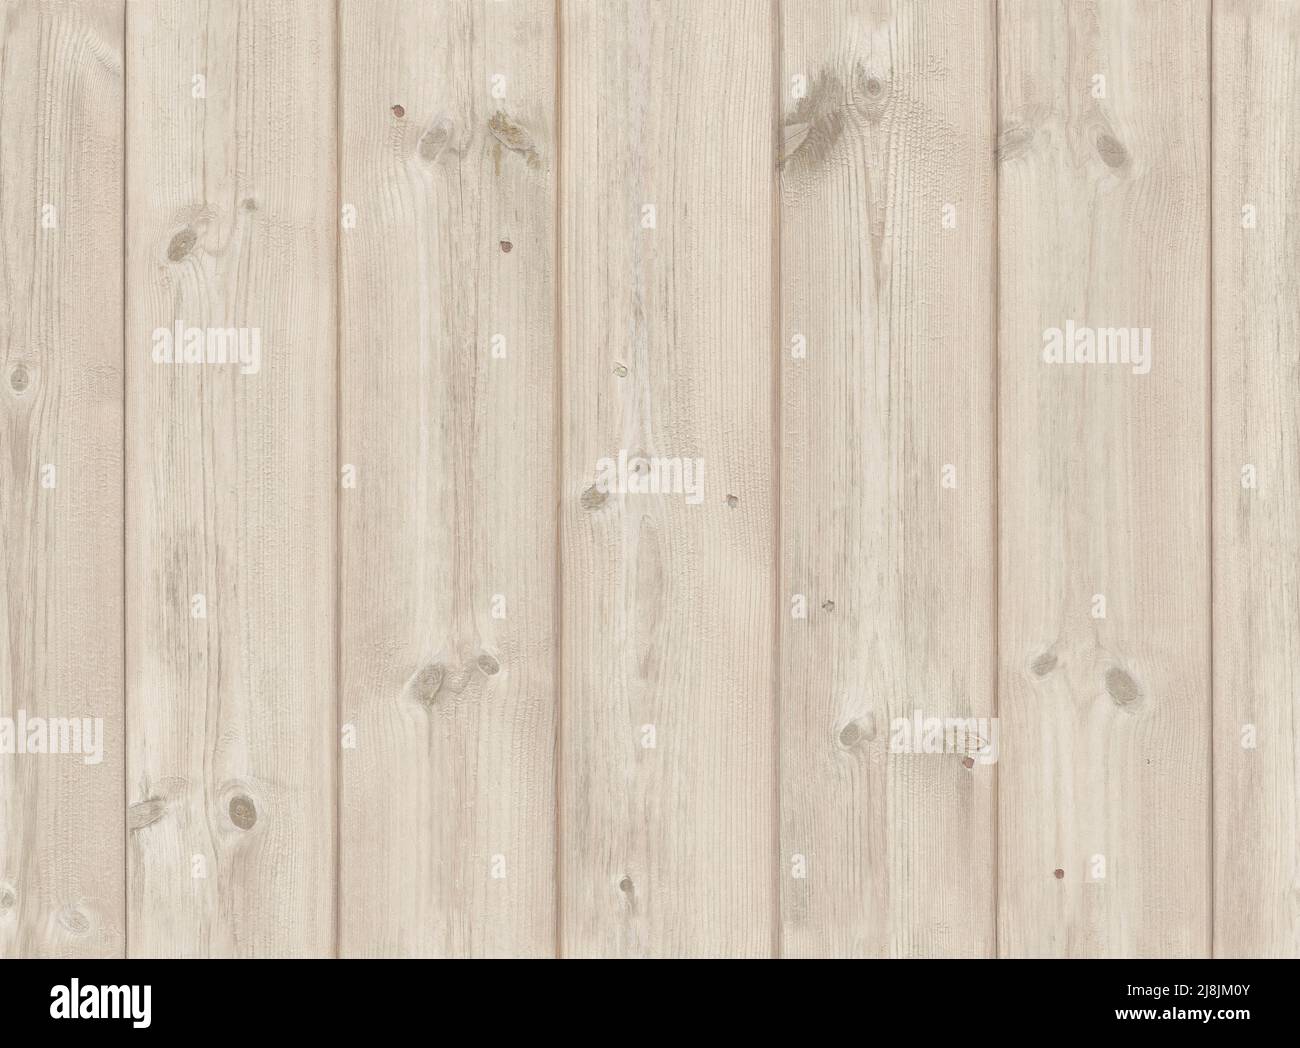 Weathered wood siding or wooden wall paneling, a seamless repeating, tileable pattern suitable for a background or texture. Stock Photo